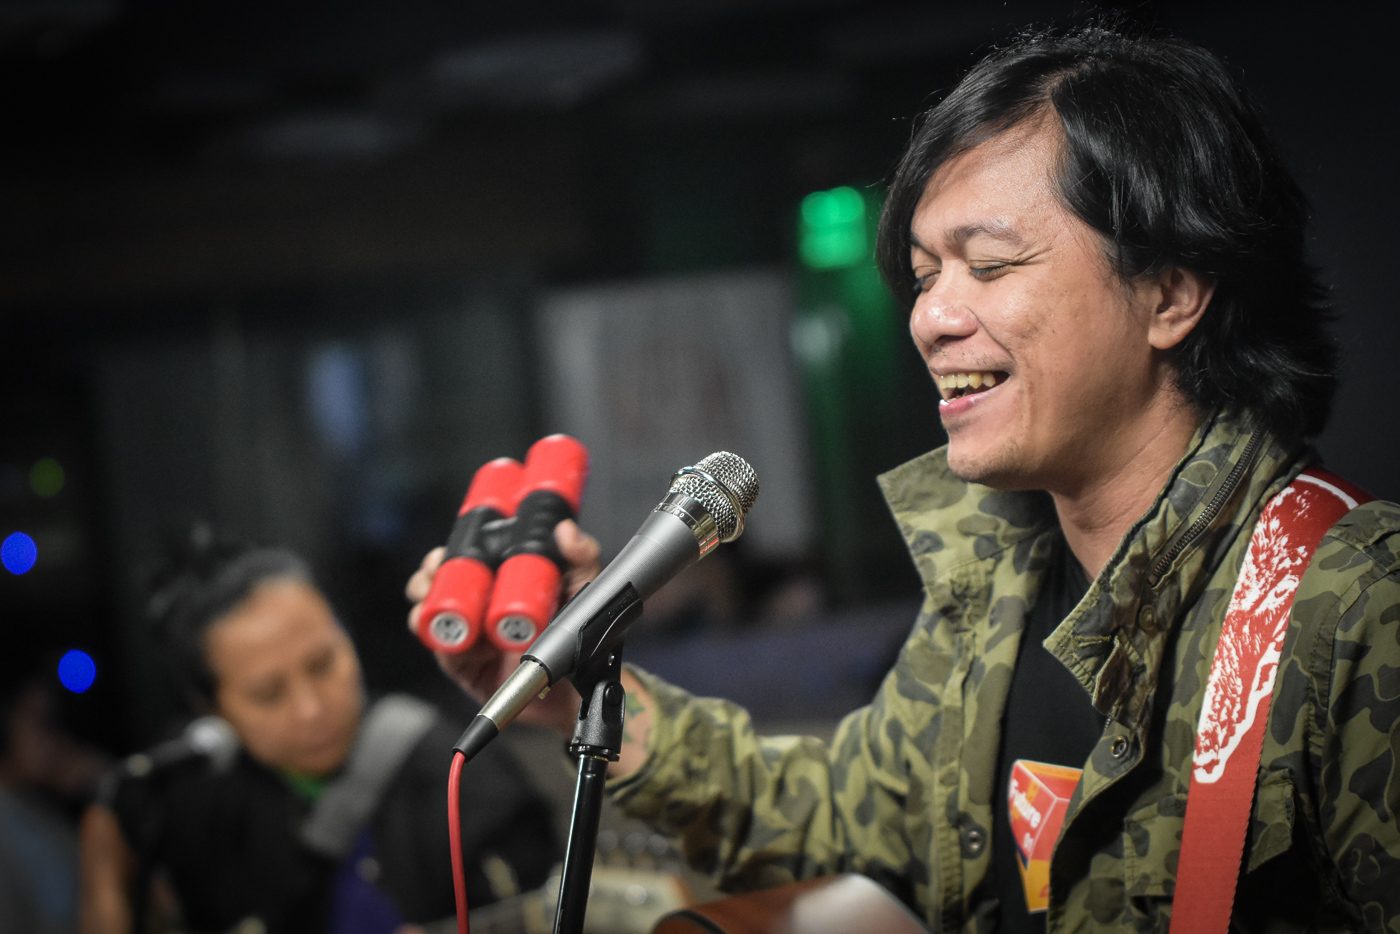 Raymund Marasigan calls out unauthorized use of pop songs in campaign jingles